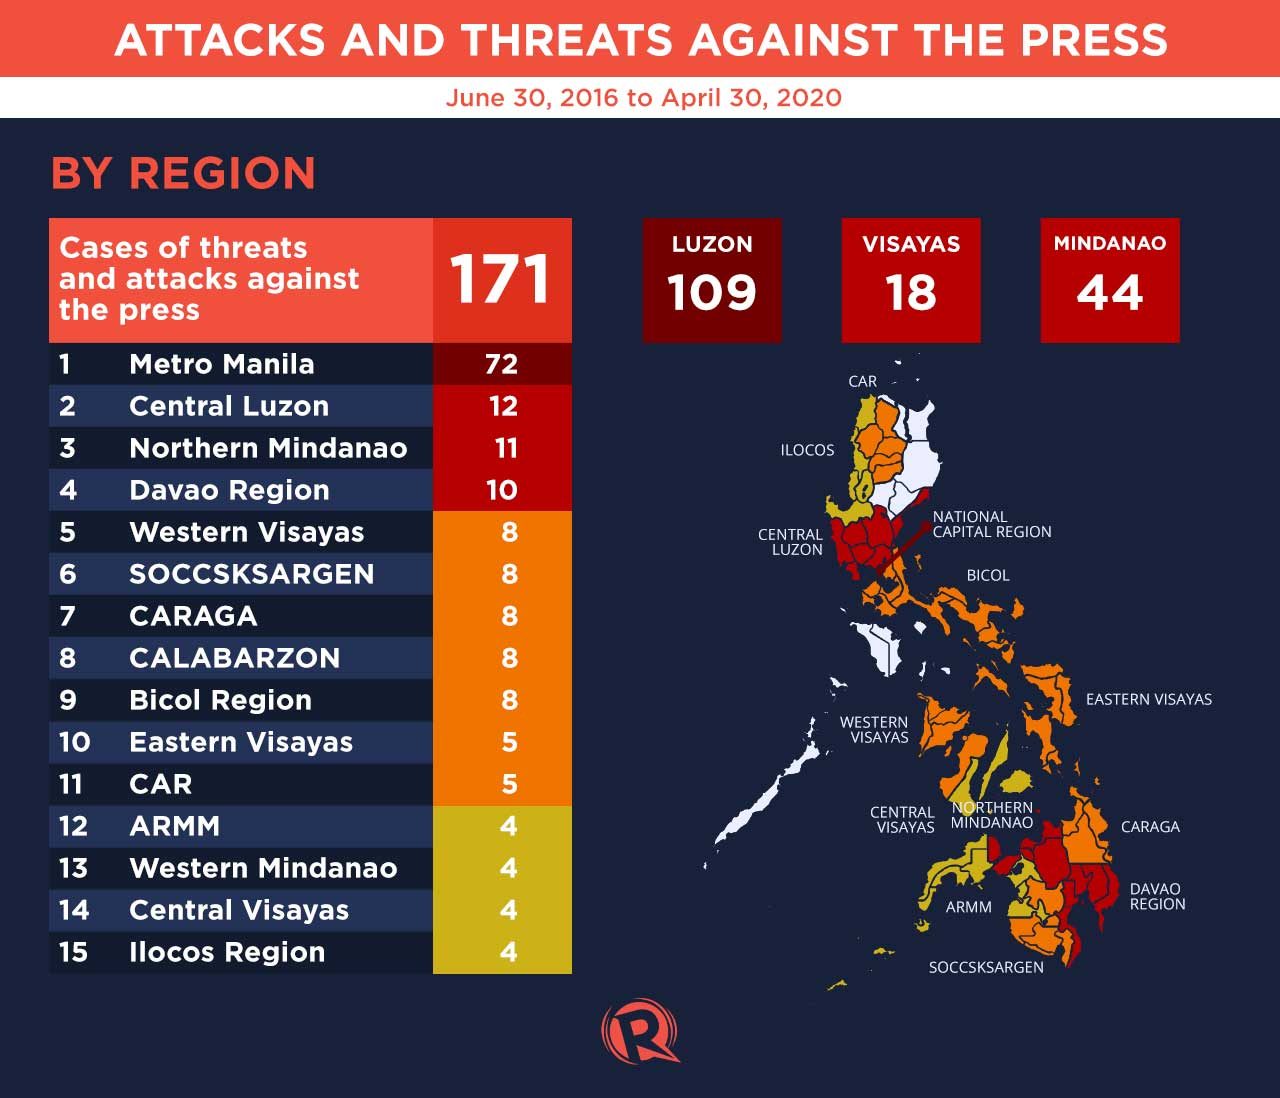 ATTACKS, THREATS AGAINST PRESS. Adapted from infographic made by Center for Media Freedom and Responsibility. 